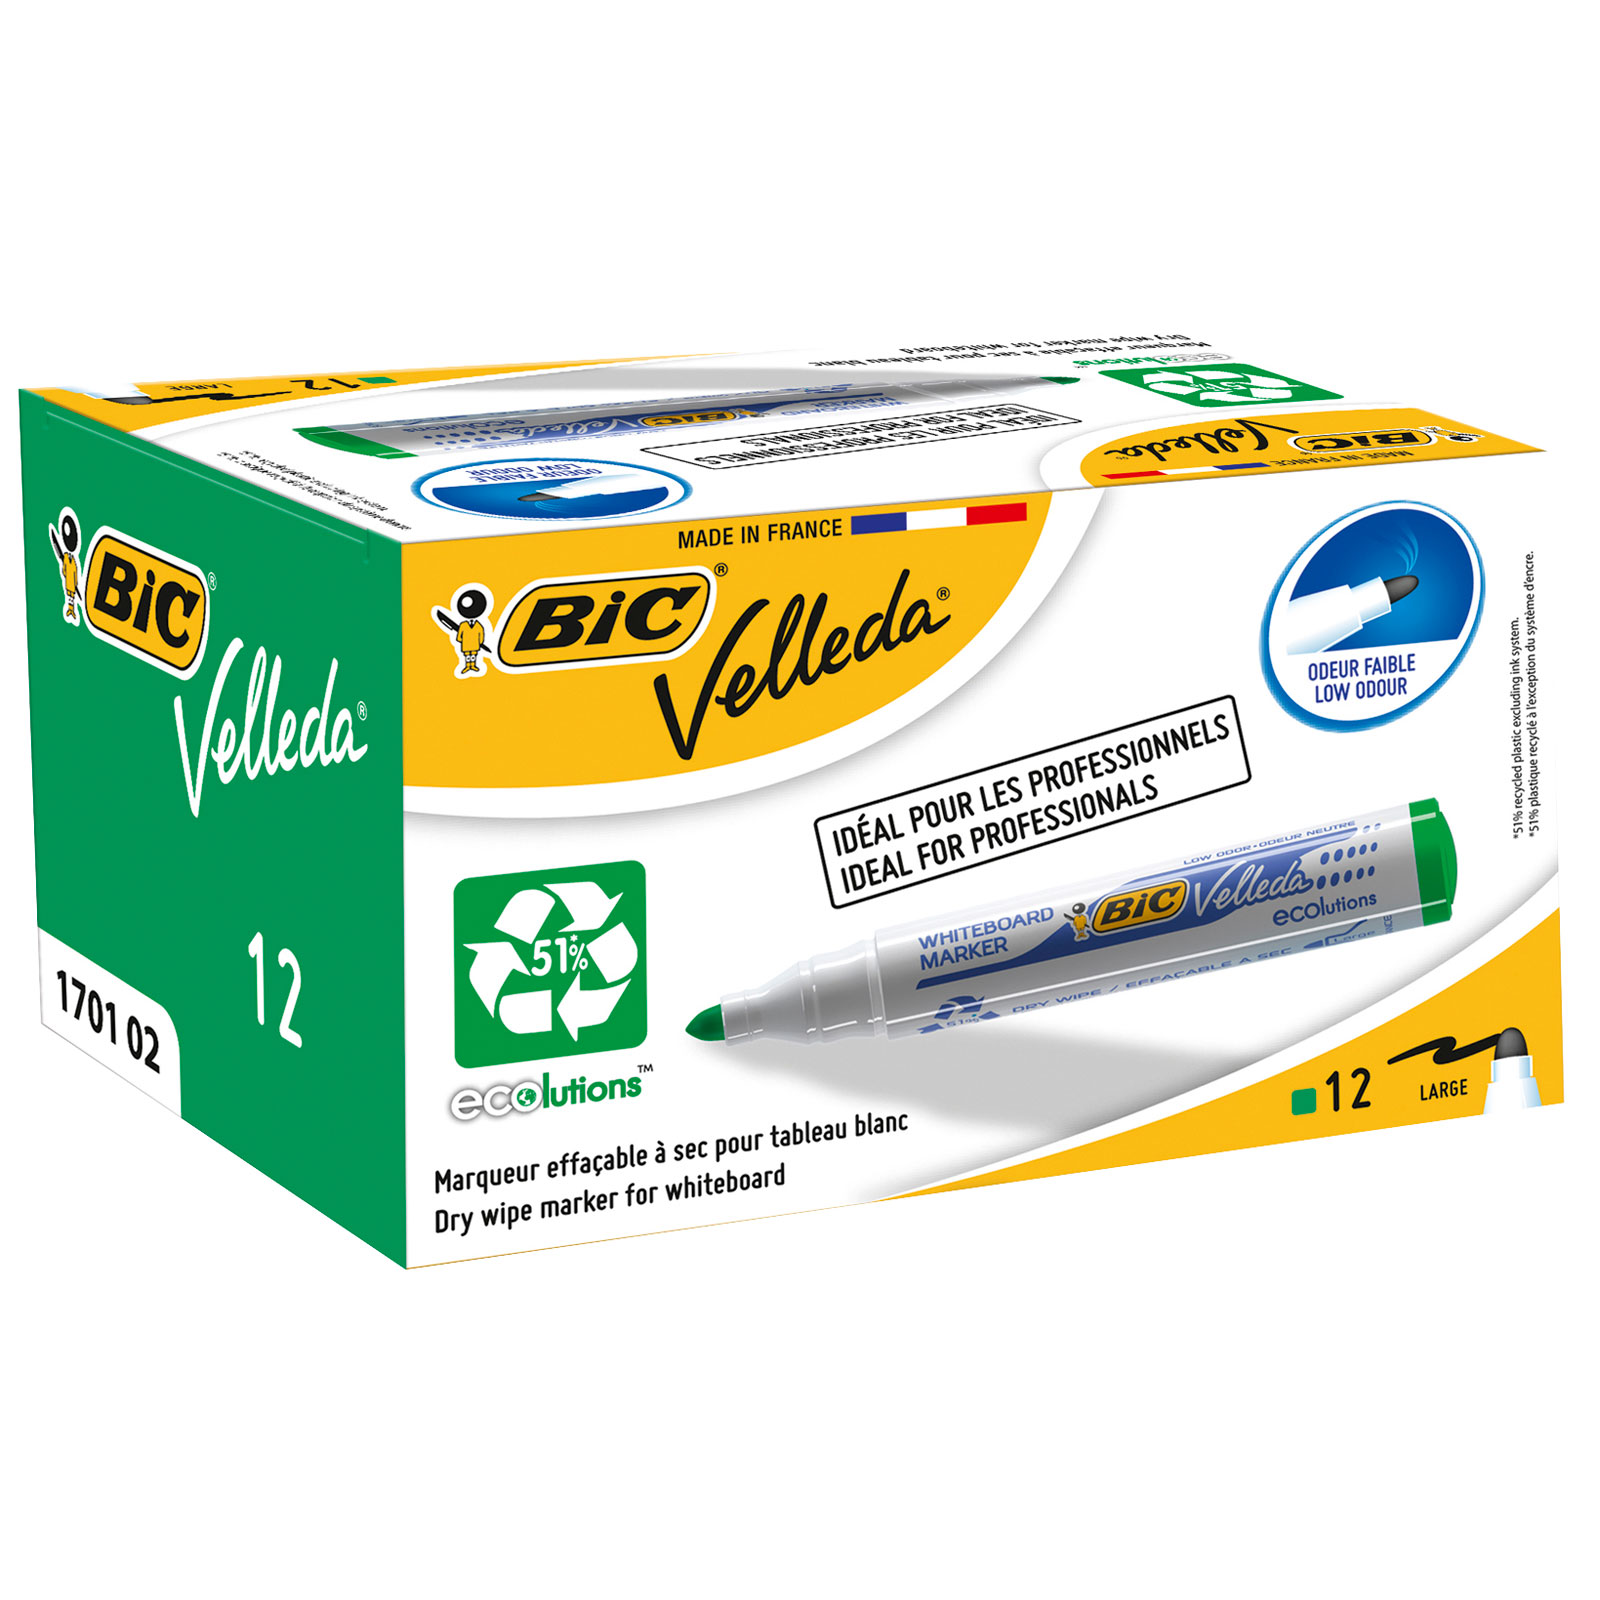 BIC Velleda Double-Sided Dry Erase Board (21 x 31 cm) with Whiteboard  Marker and Eraser - Green Frame, Pack of 1 BIC